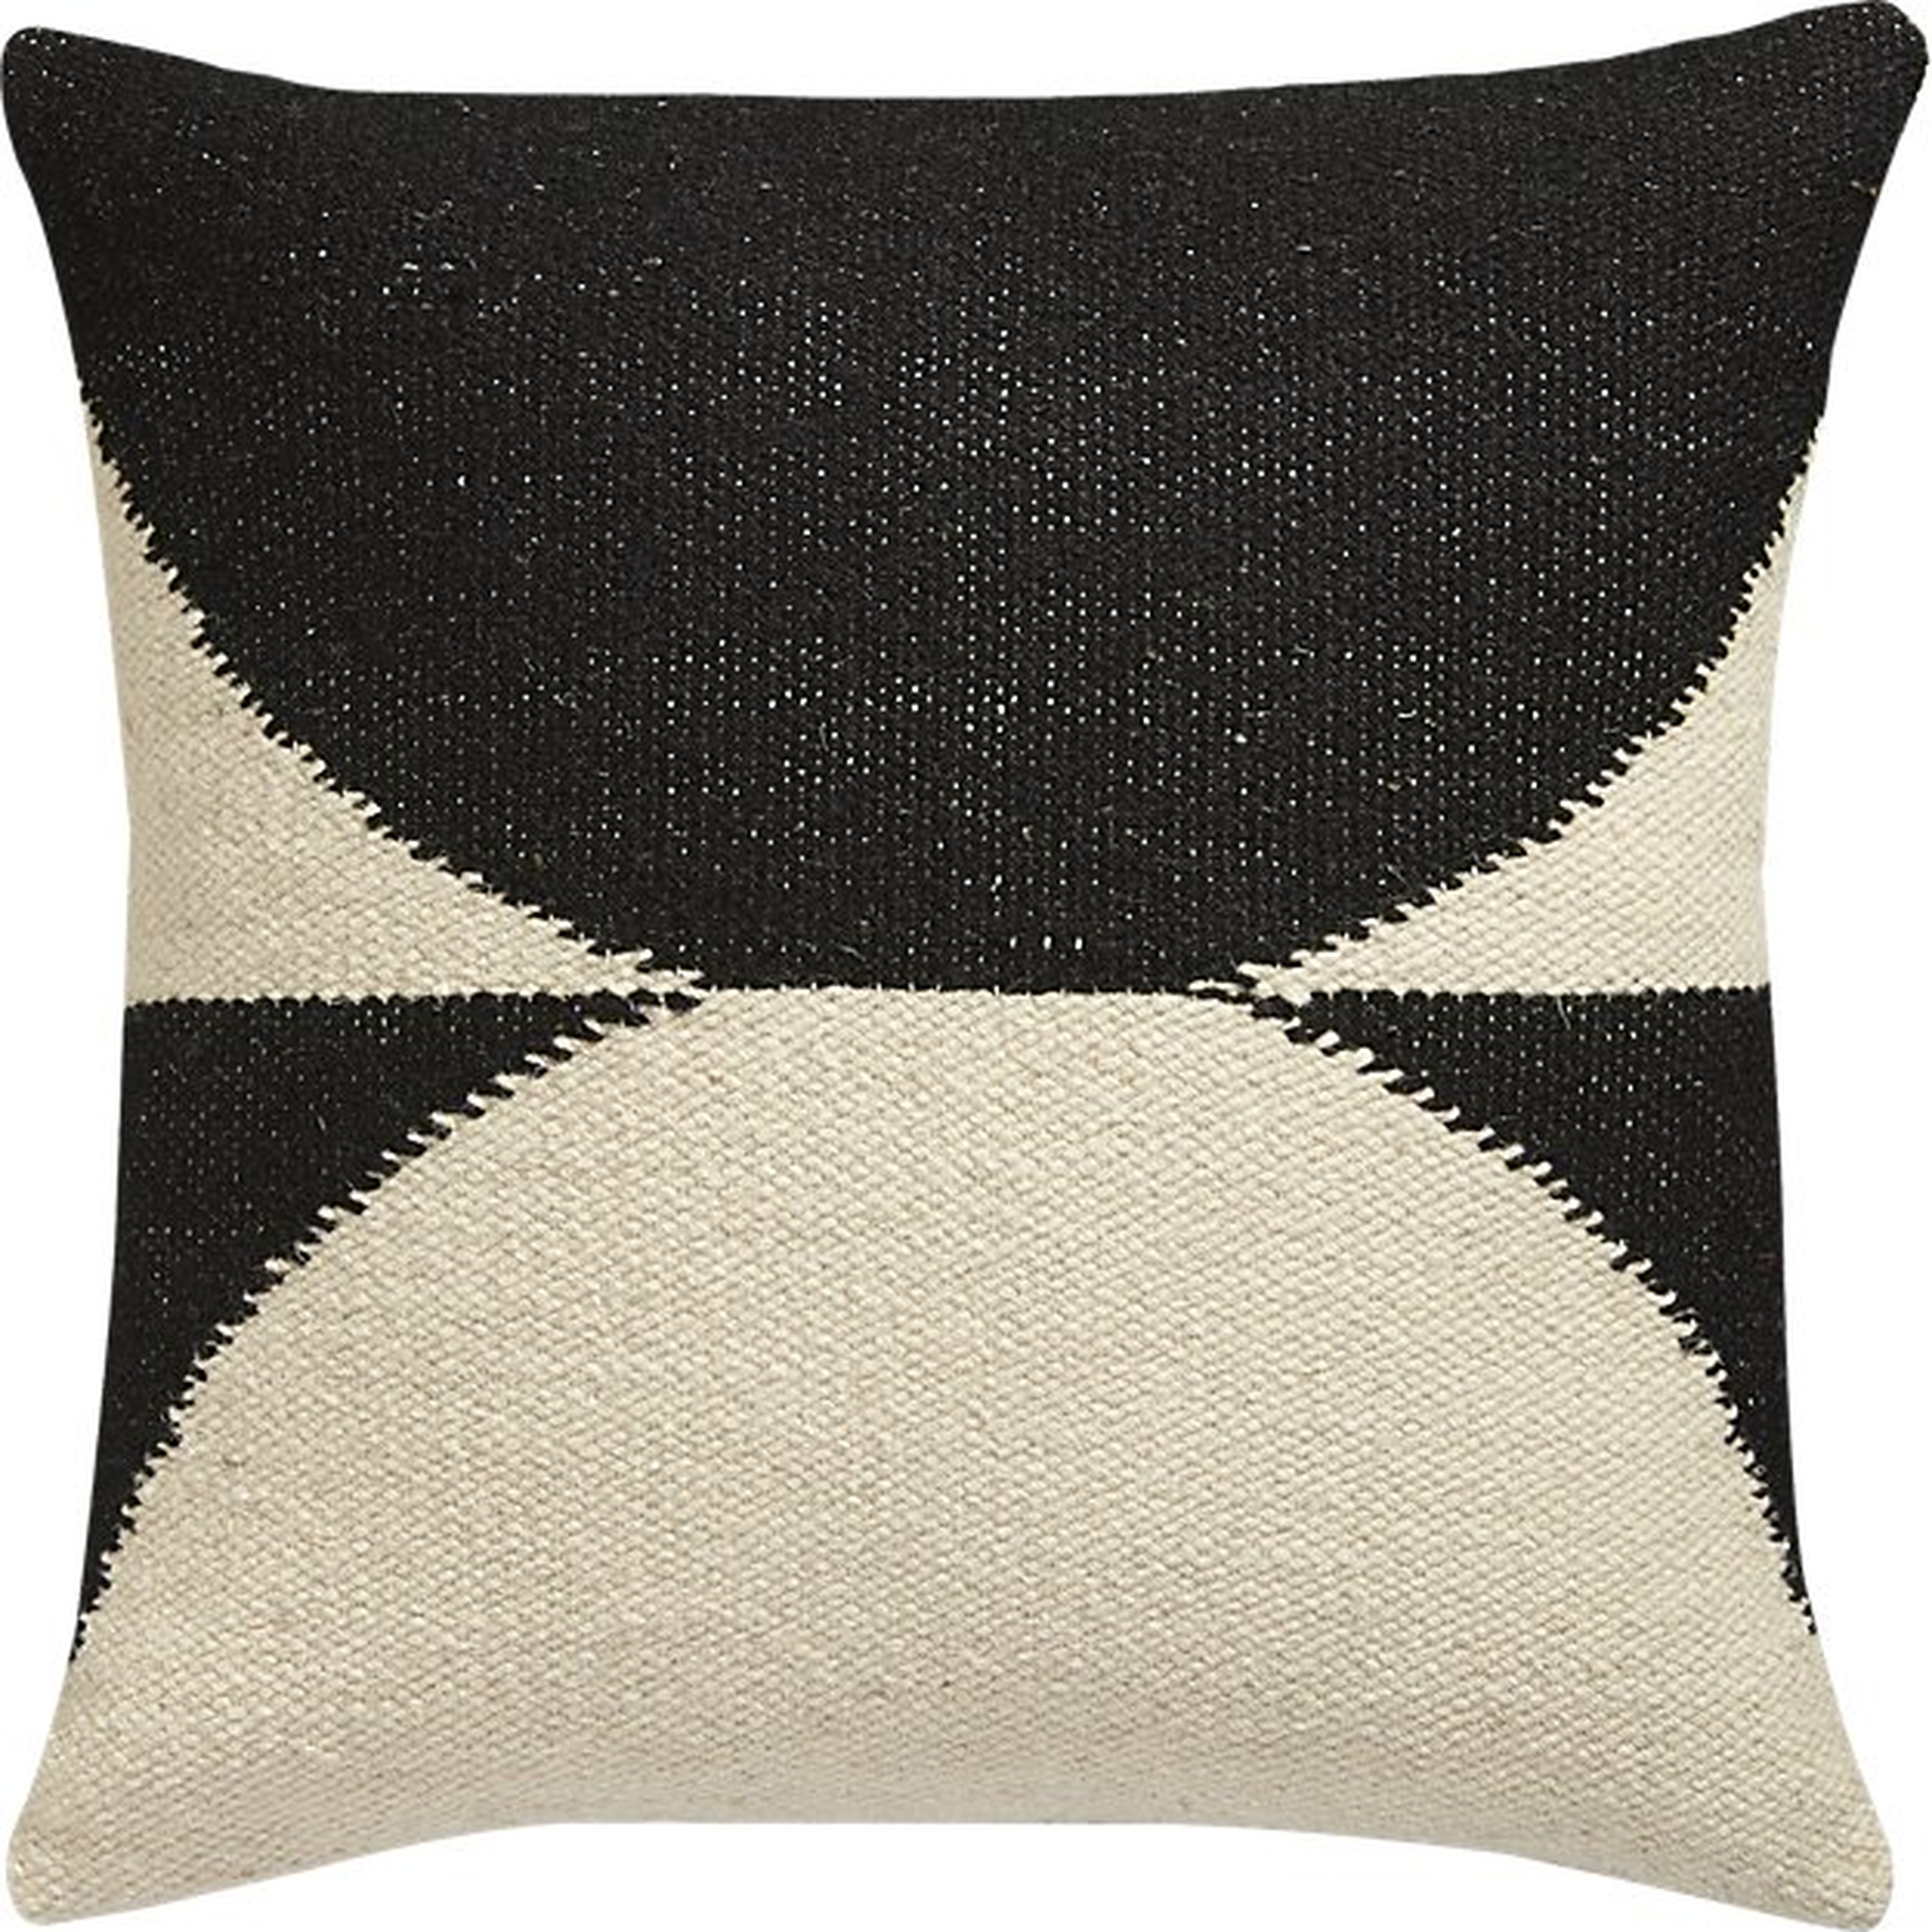 Reflect Pillow with Poly Insert, Black & White, 20" x 20" - CB2